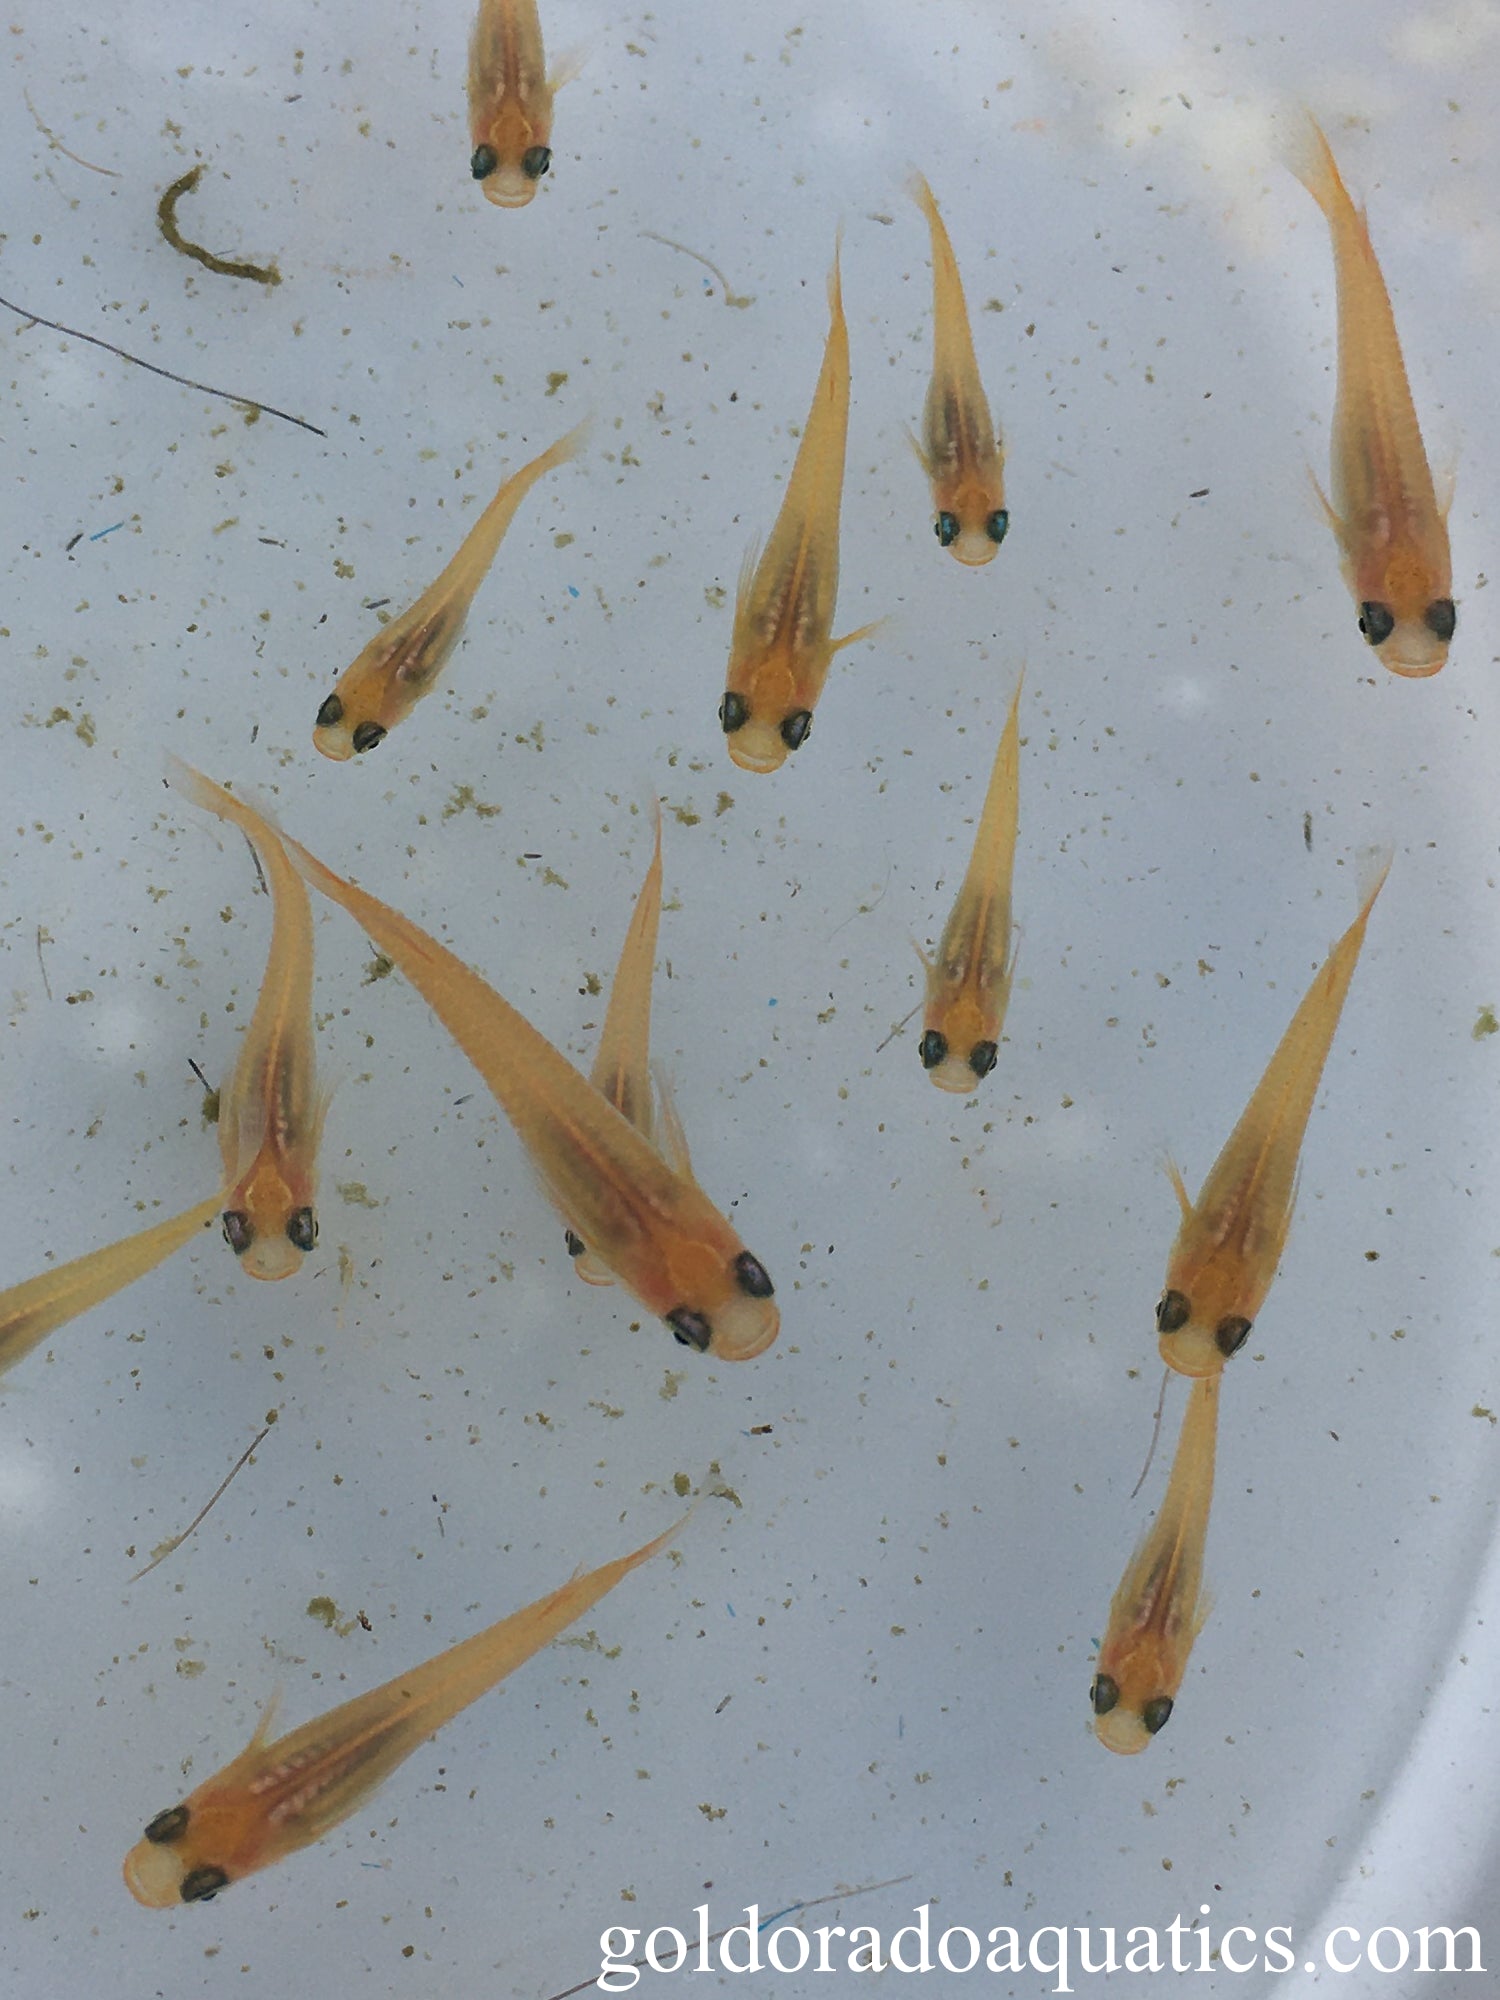 An image of a shoal of orange Japanese rice fish.